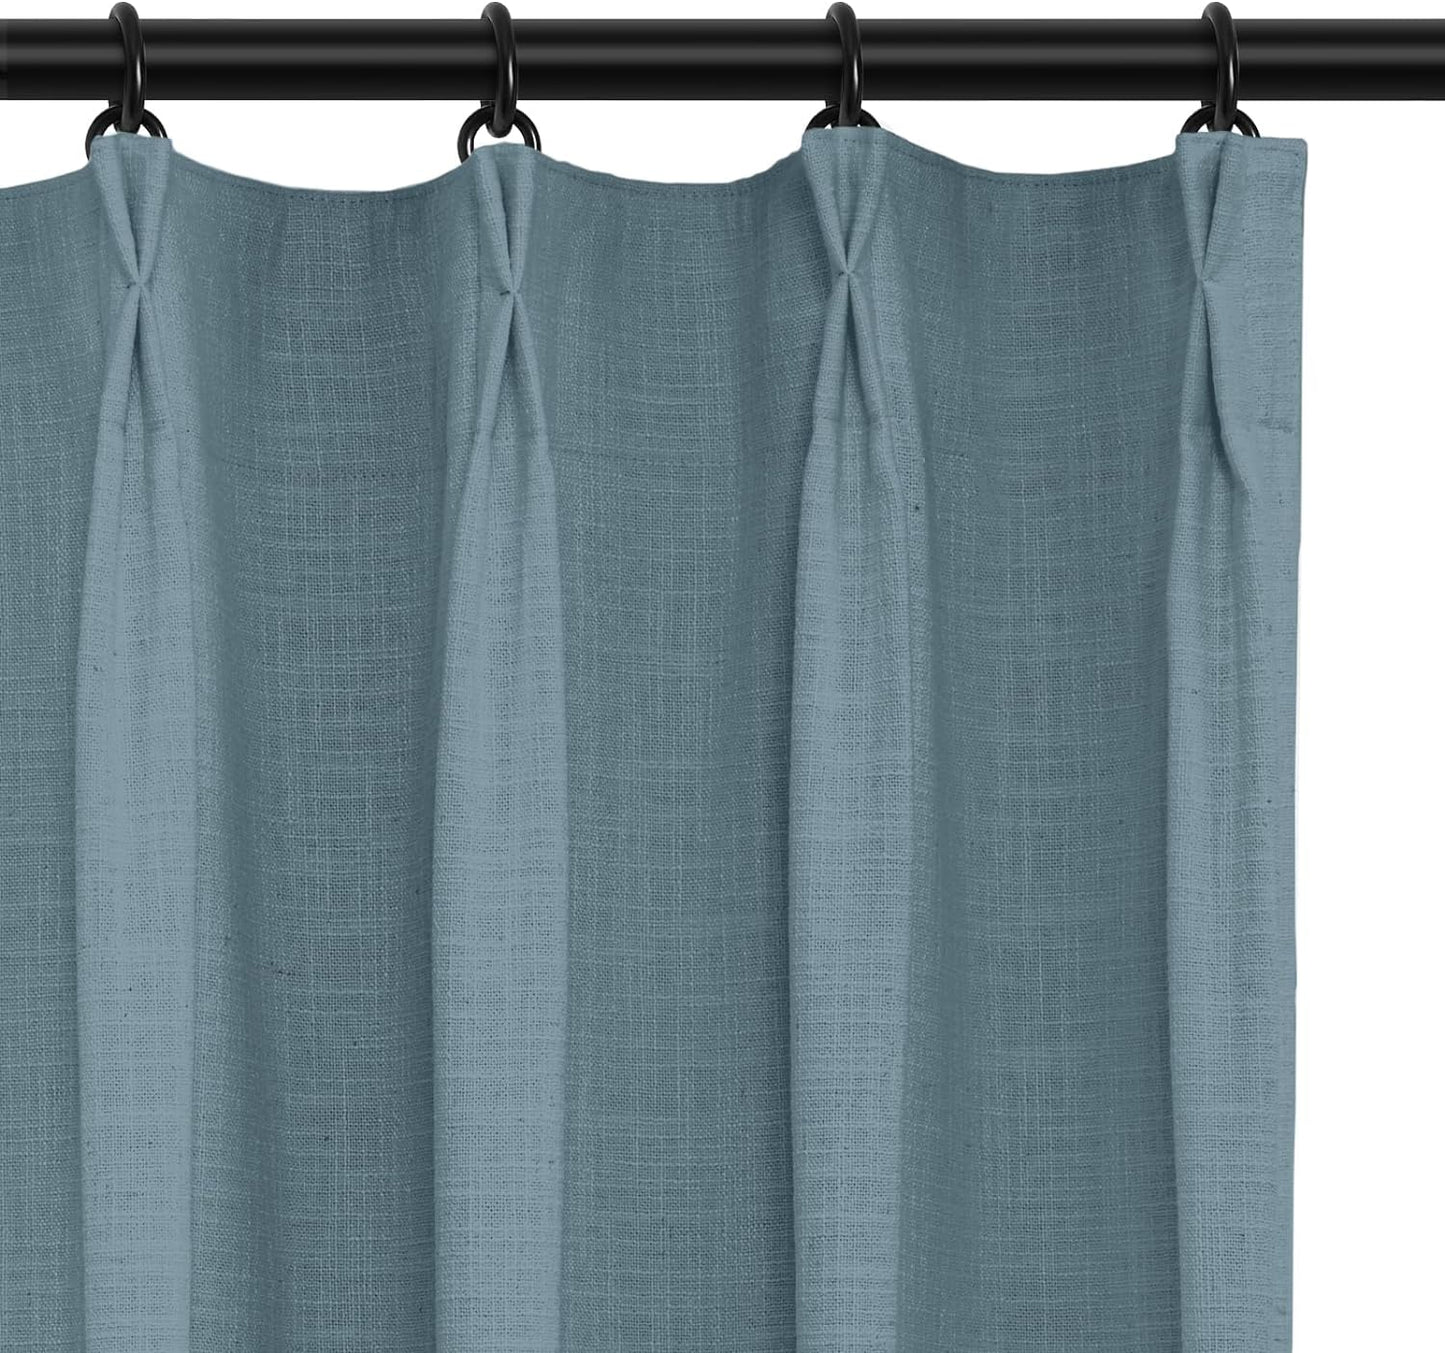 INOVADAY 100% Blackout Curtains for Bedroom, Pinch Pleated Linen Blackout Curtains 96 Inch Length 2 Panels Set, Thermal Room Darkening Linen Curtain Drapes for Living Room, W40 X L96,Beige White  INOVADAY Sea Green 40"W X 84"L-2 Panels 